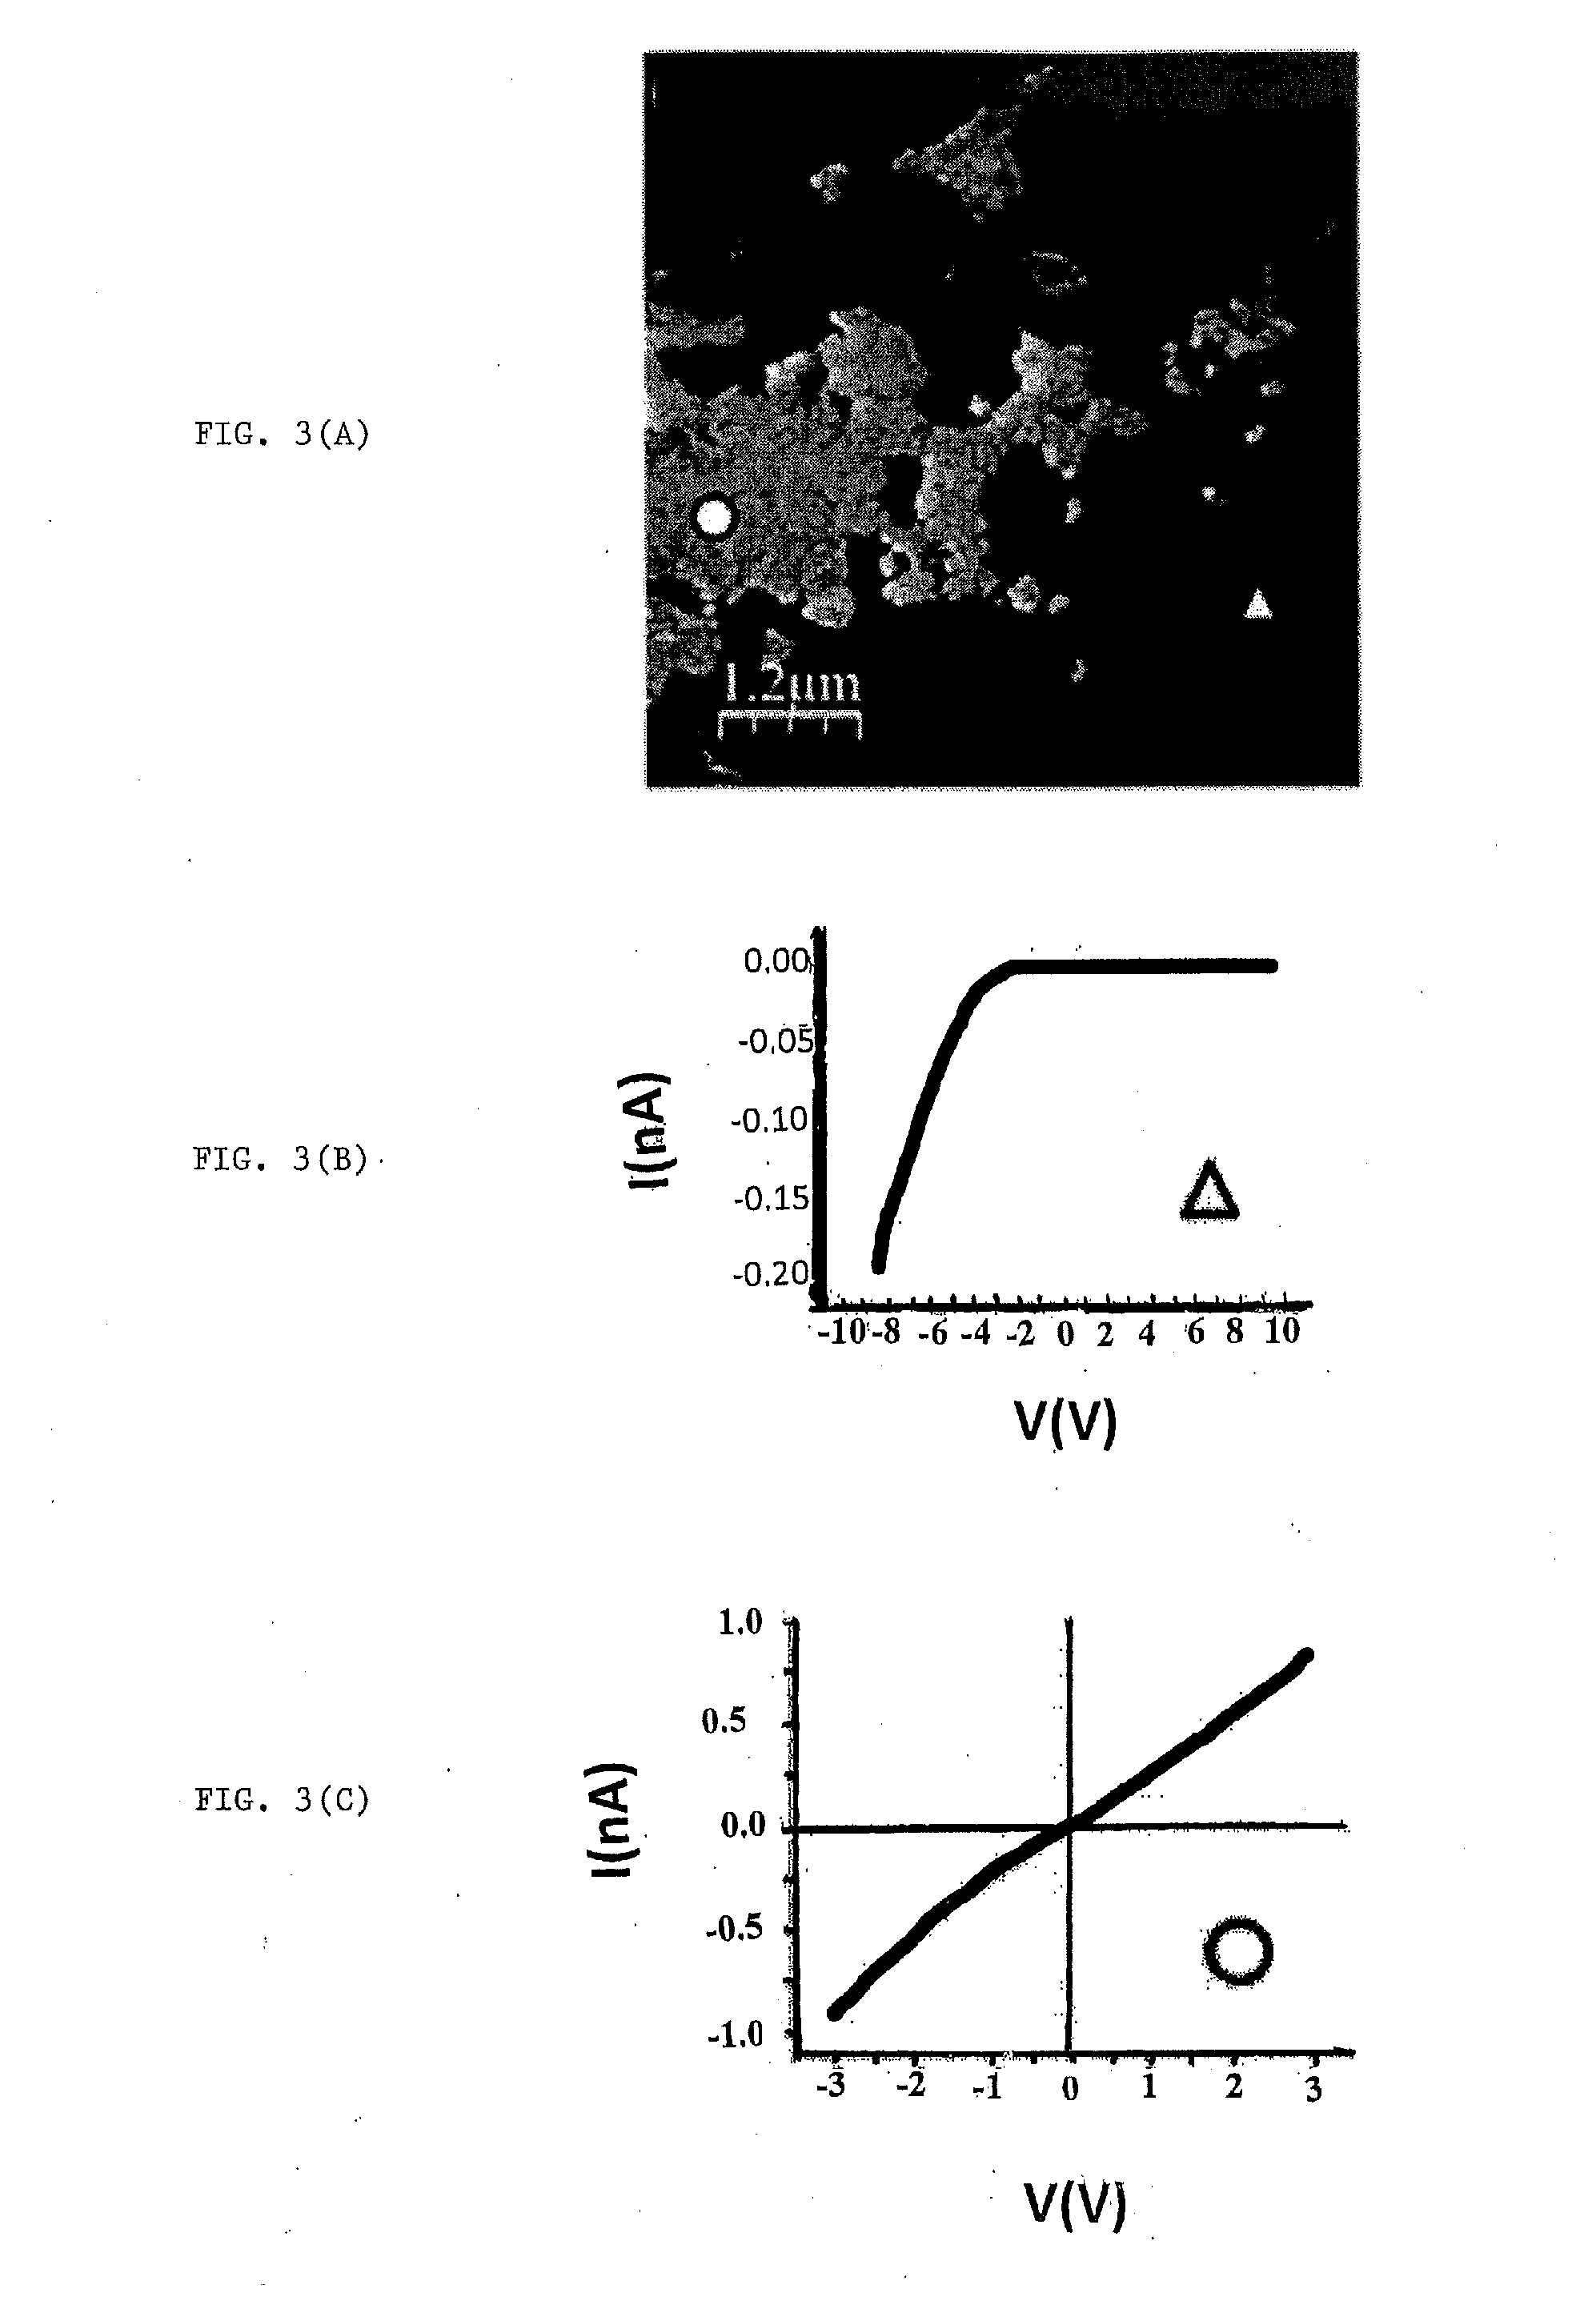 Process For Production Of Graphene/Silicon Carbide Ceramic Composites